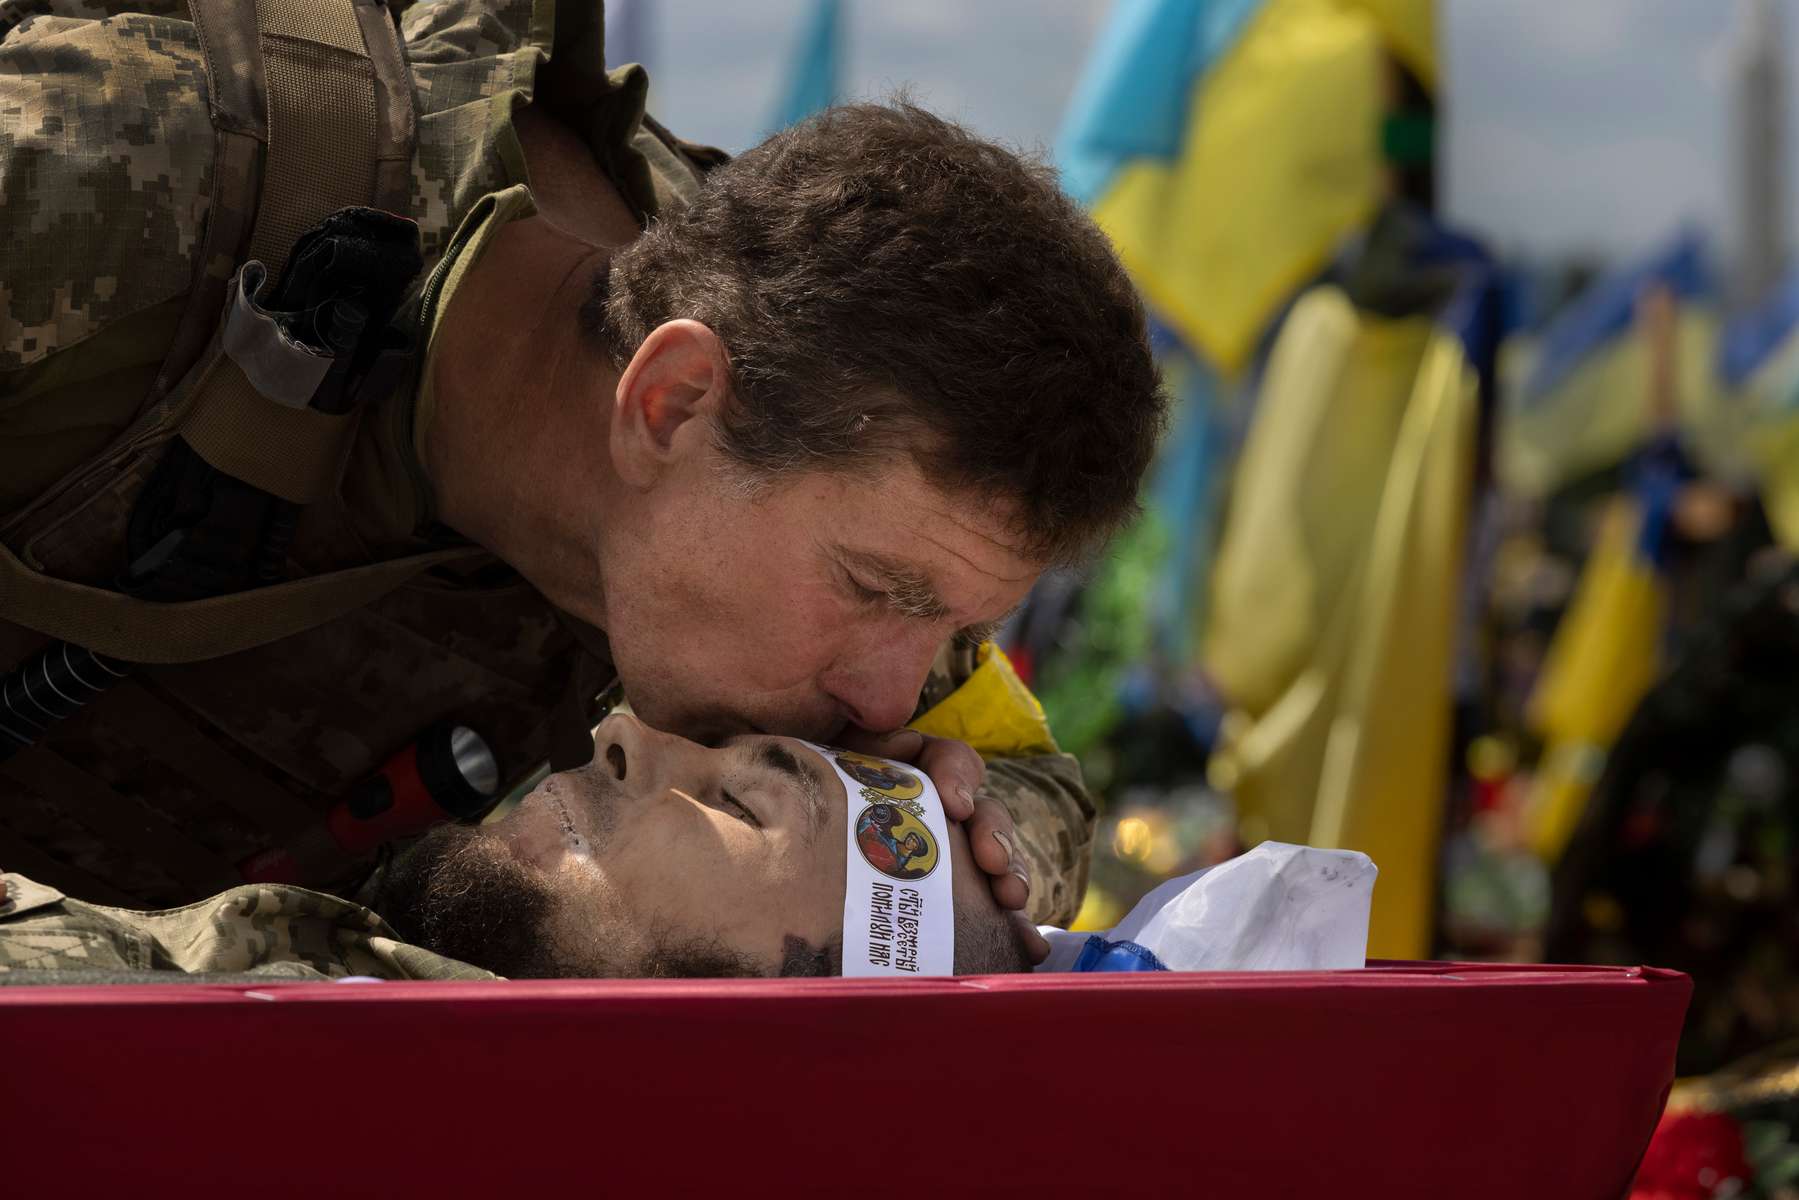 At a Kharkiv cemetery, a Ukranian soldier says goodbye with a kiss on the forehead of Maxim Shcherbak, 29,  who was killed on June 19th in the Donbas region.